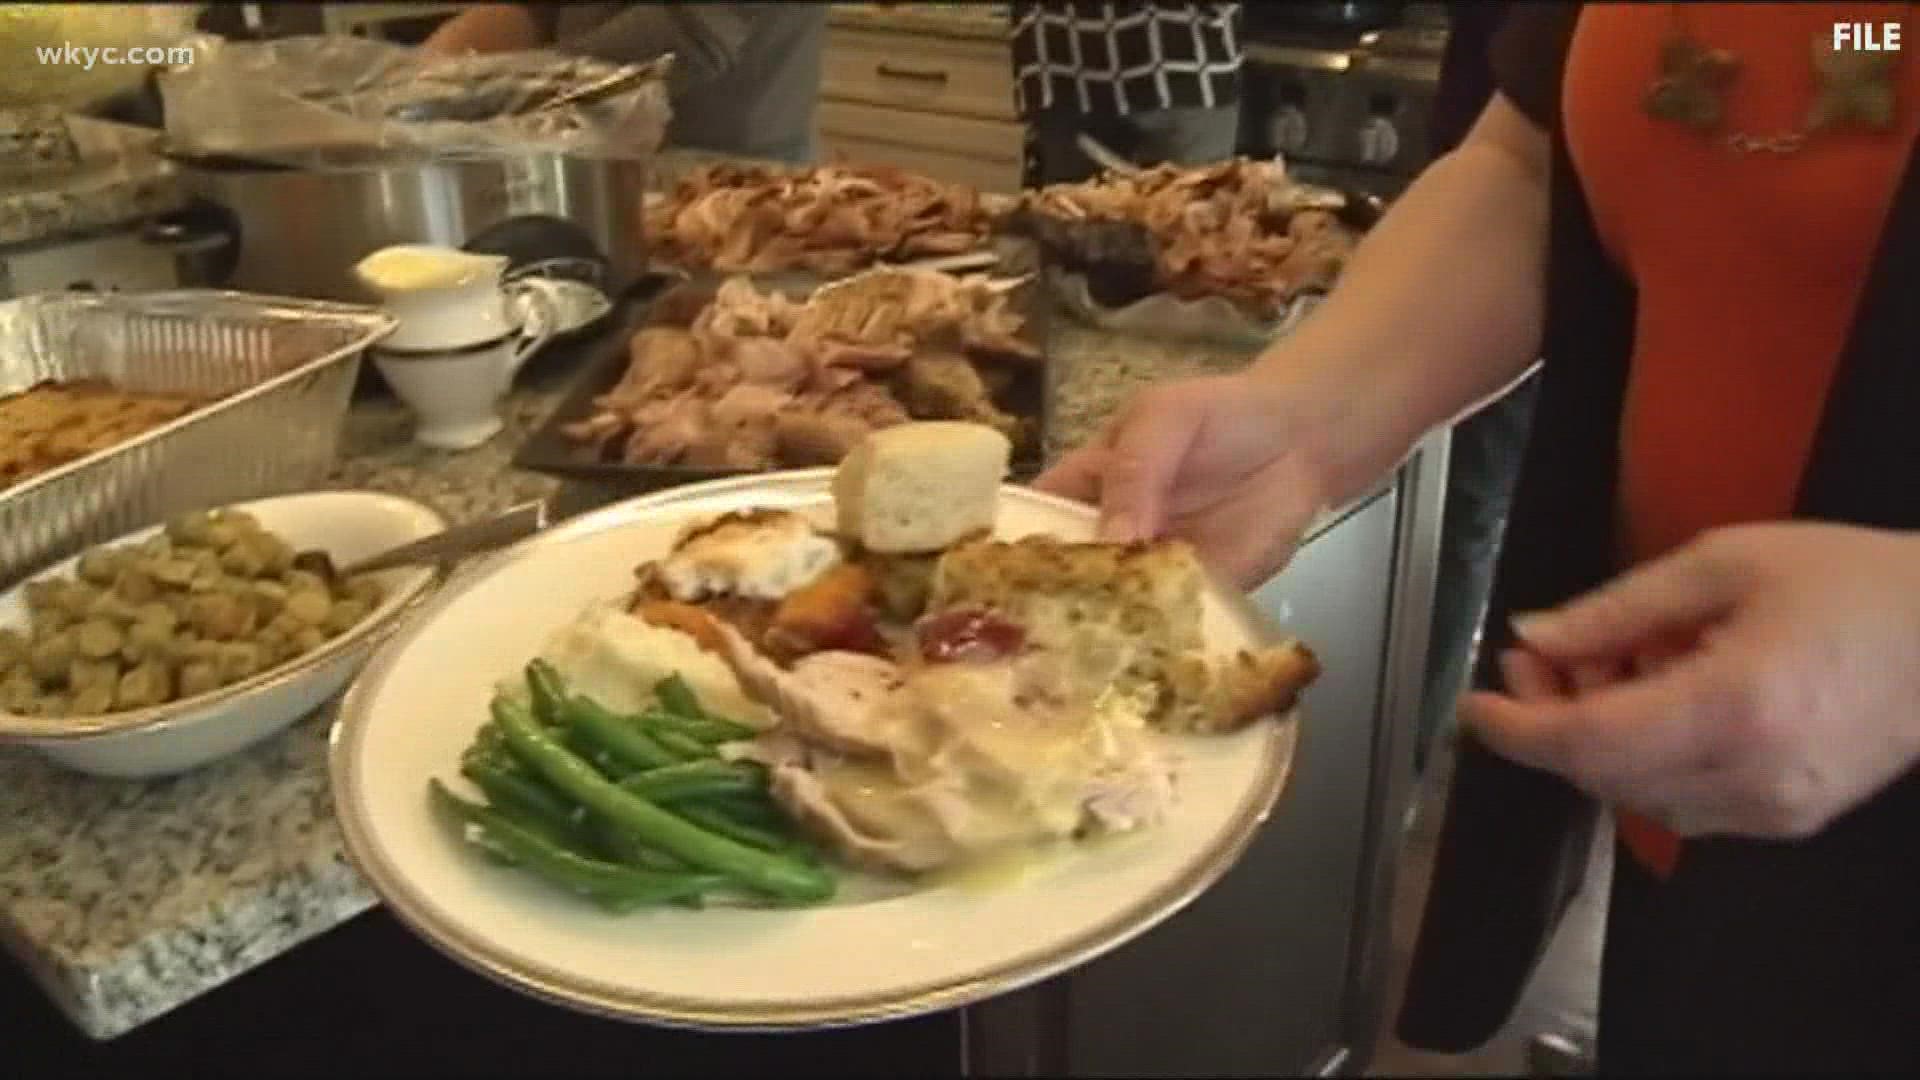 Due to supply chain issues and worker shortages, Thanksgiving dinner might cost a little more this year. Lynna Lai reports.